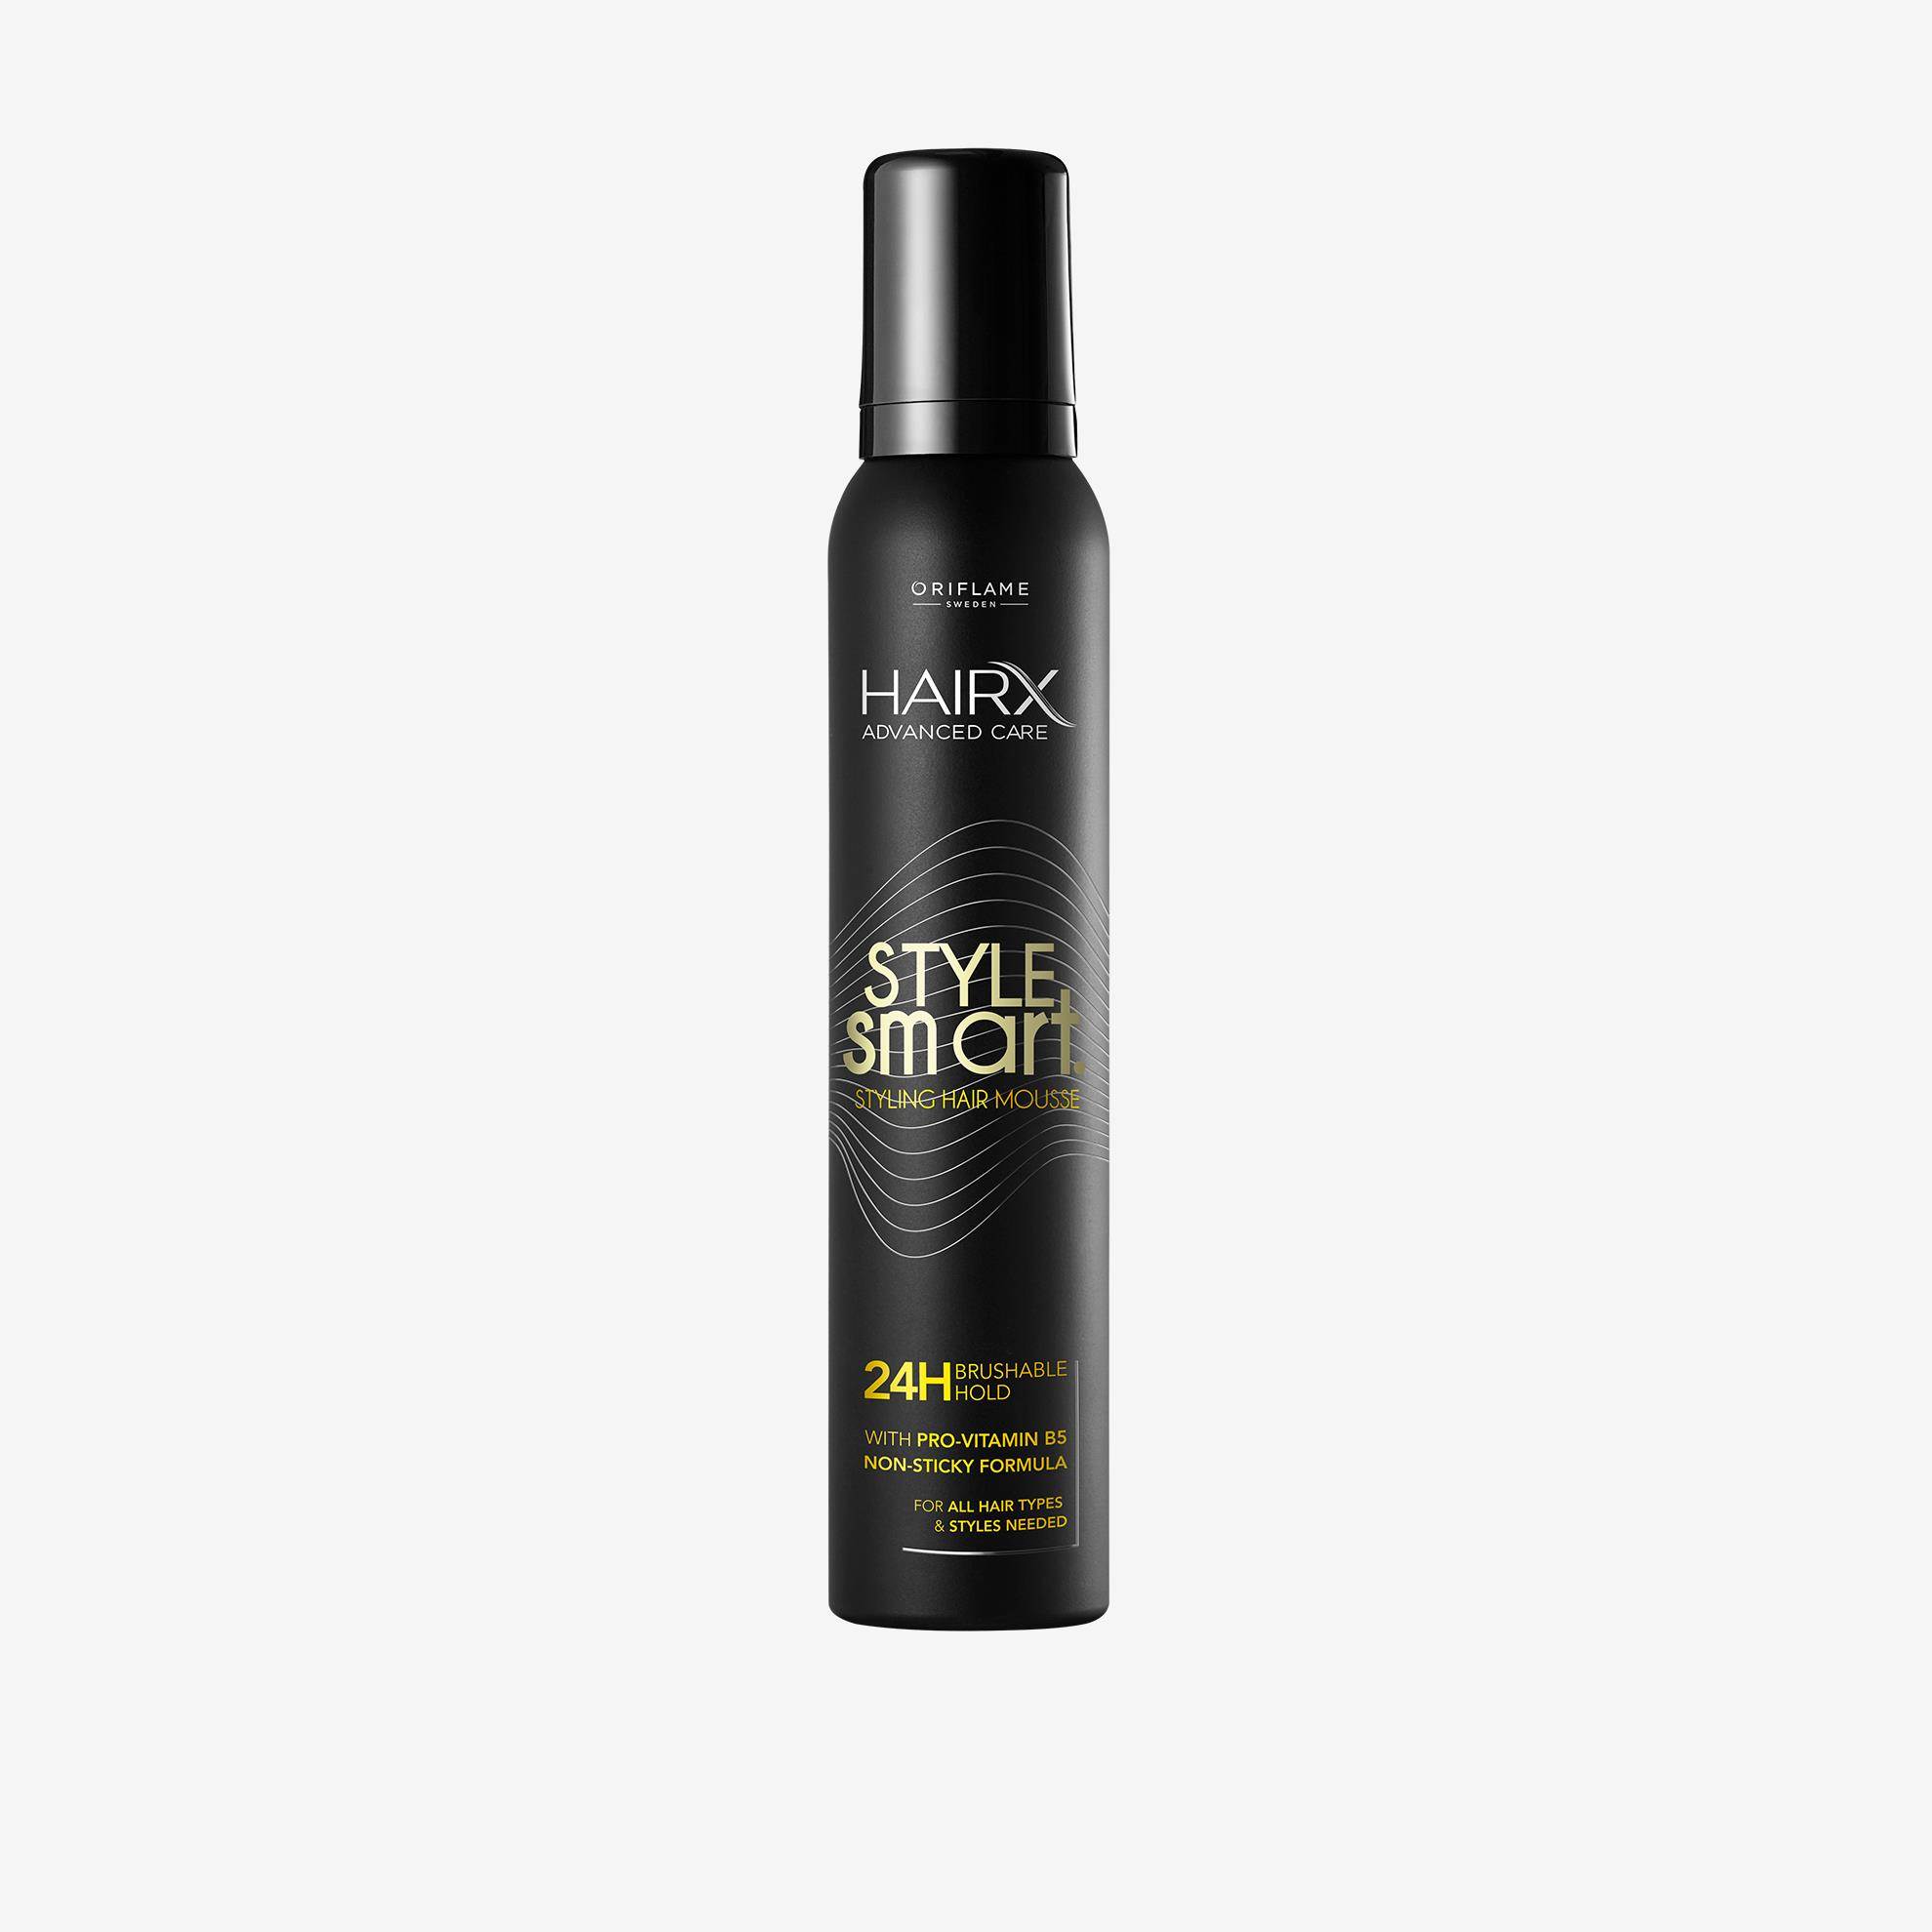 HAIRX
Advanced Care Style Smart Styling Hair Mousse